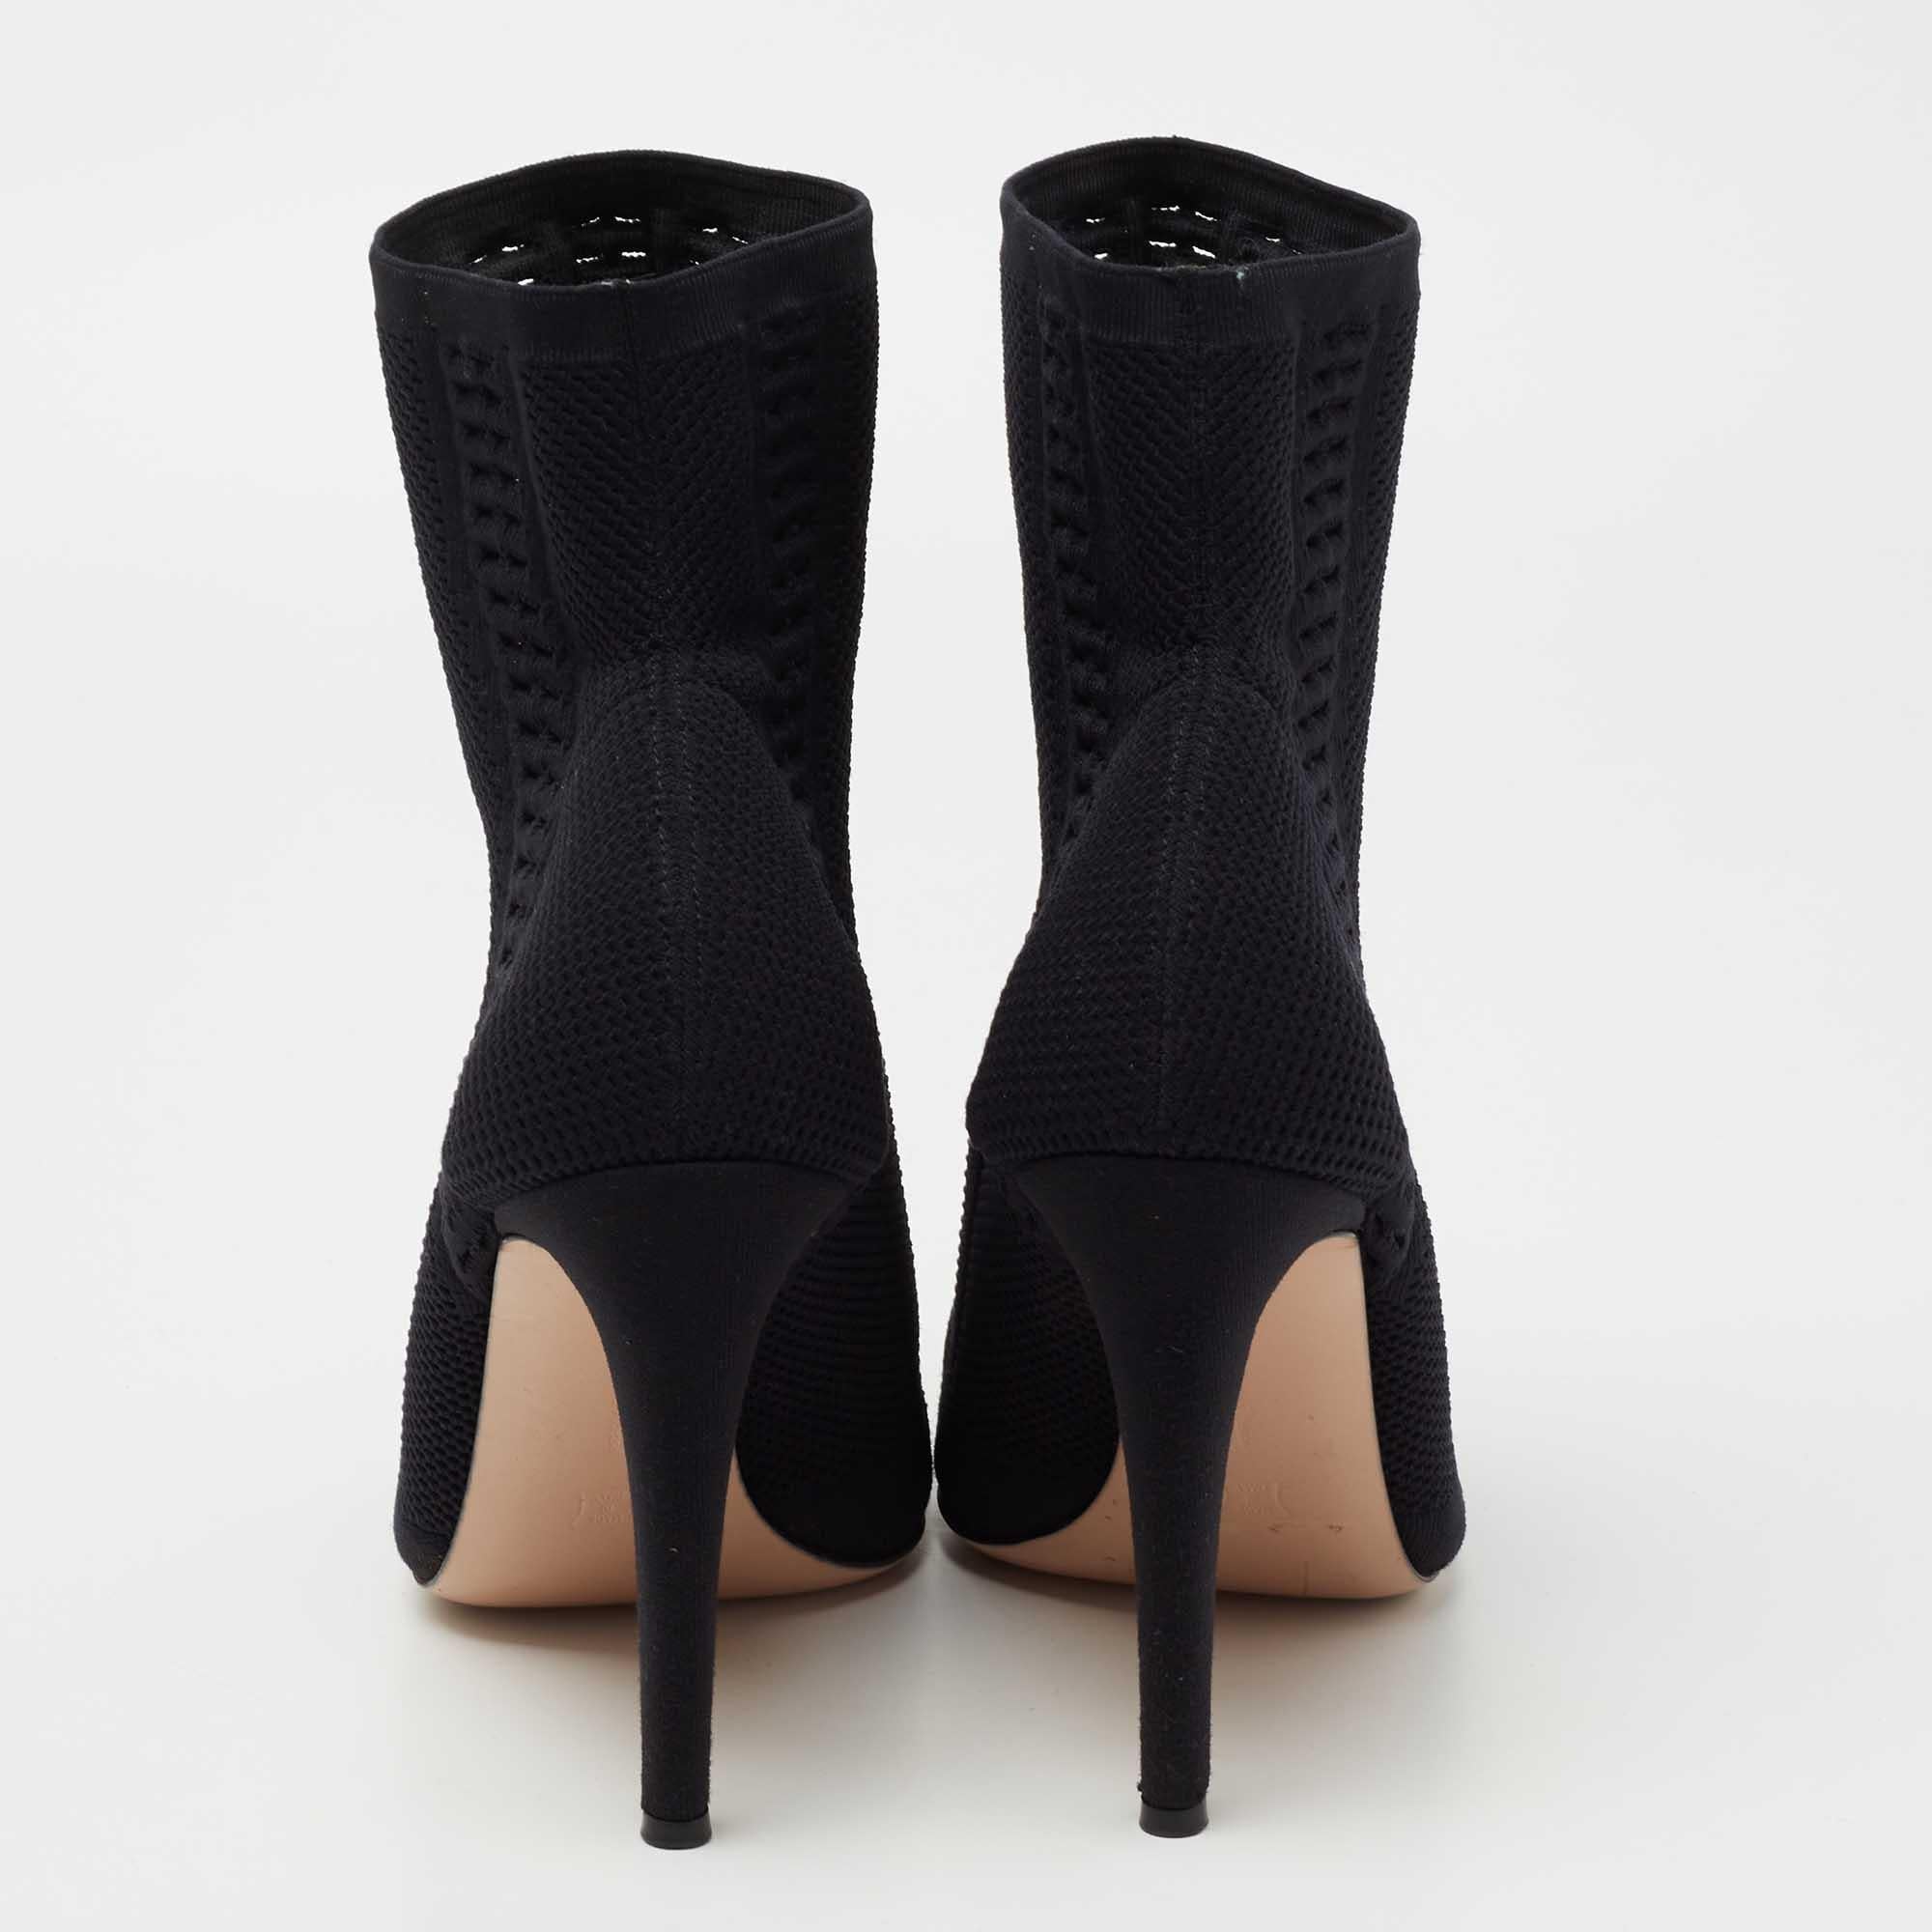 Gianvito Rossi Black Knit Fabric Vires Open-Toe Ankle Booties Size 40 In Good Condition For Sale In Dubai, Al Qouz 2